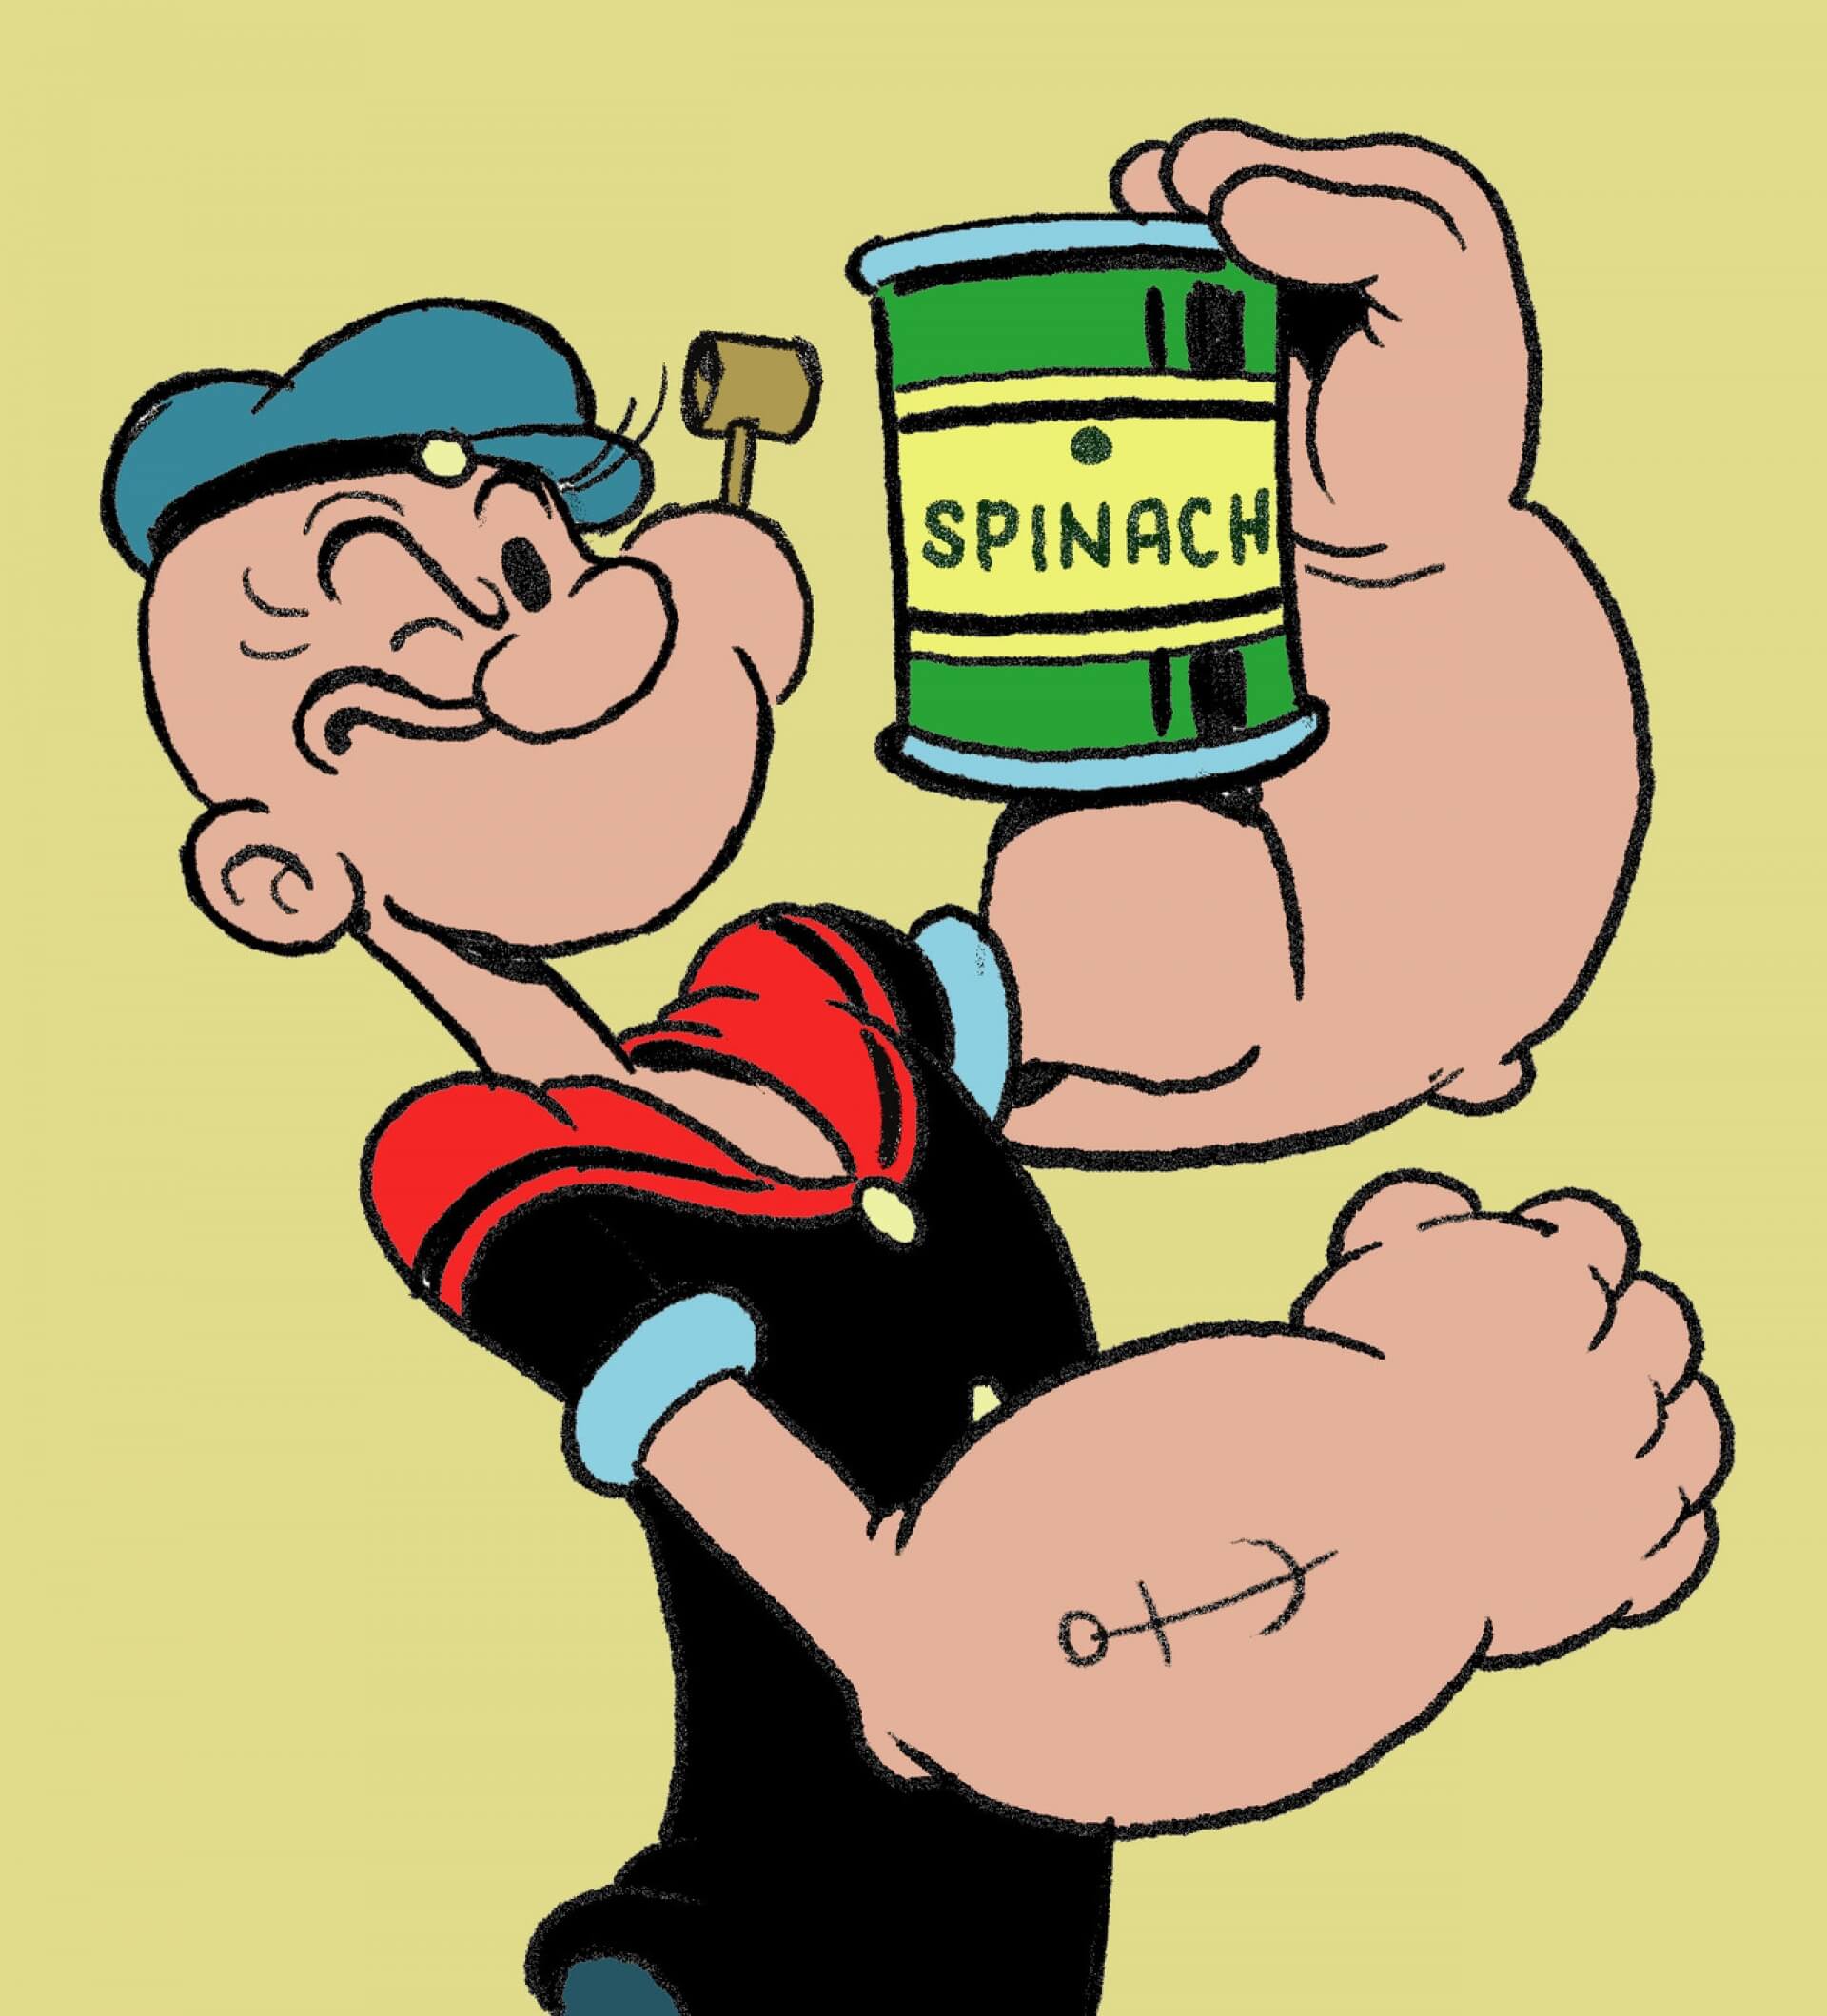 Popeye the Sailor made his first appearance